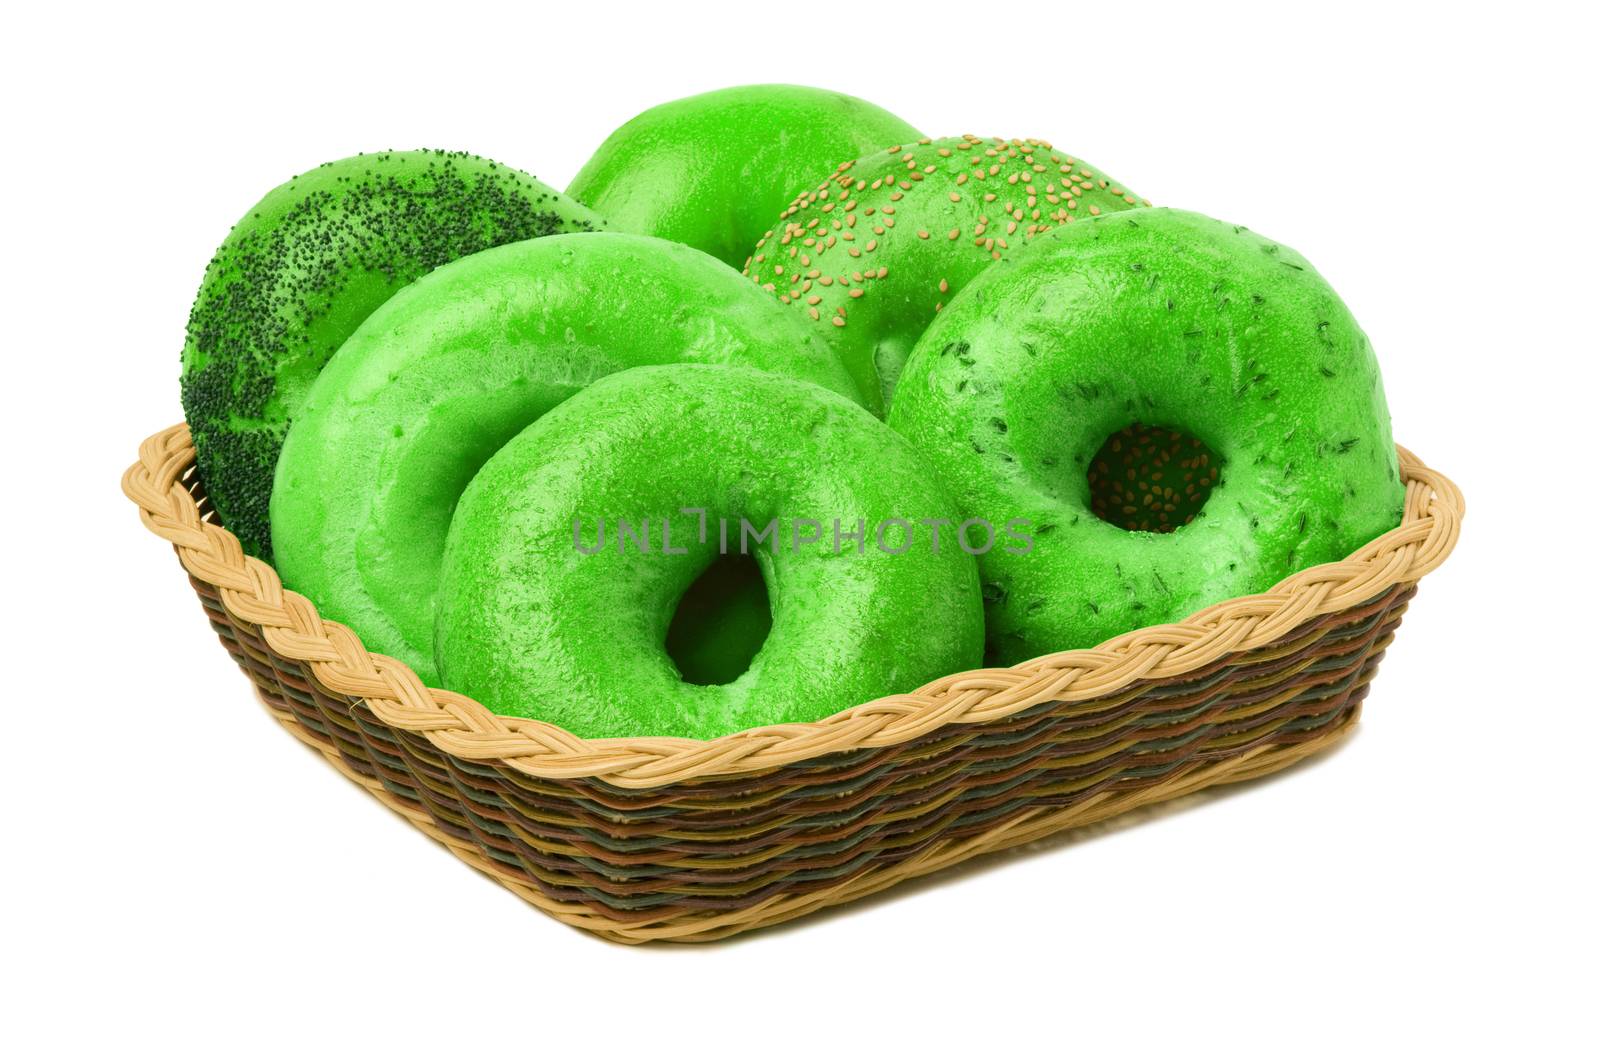 A variety of six green bagels in a basket, isolated against a white background